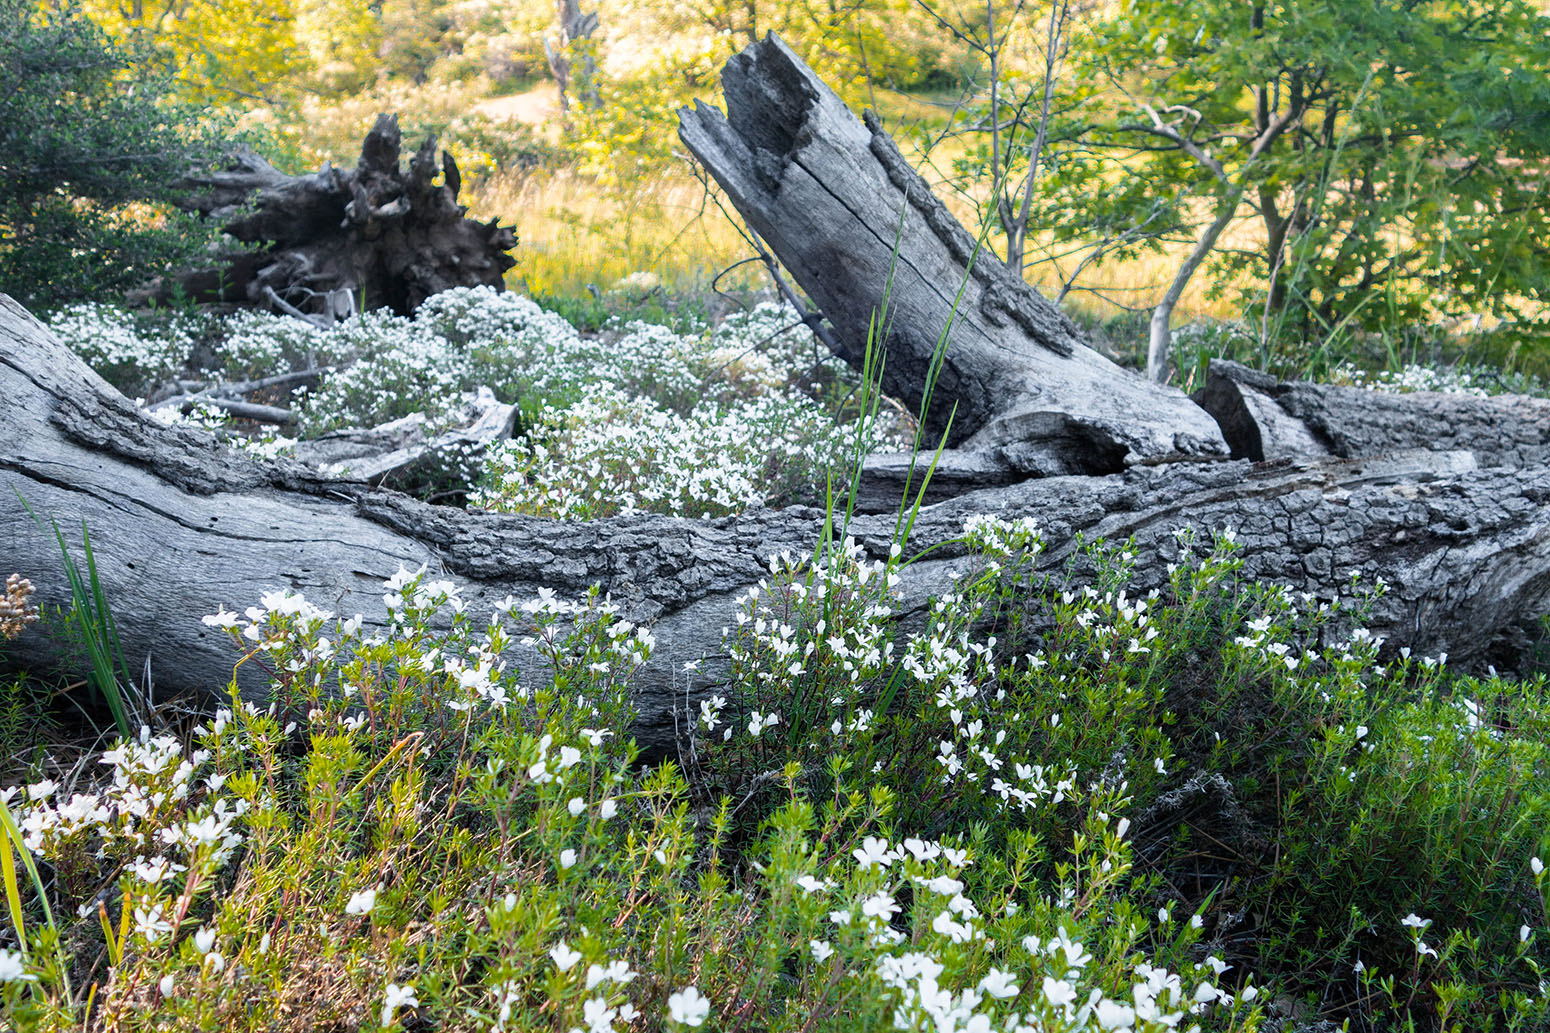 A fallen log surrounded by blooming wild flowers.